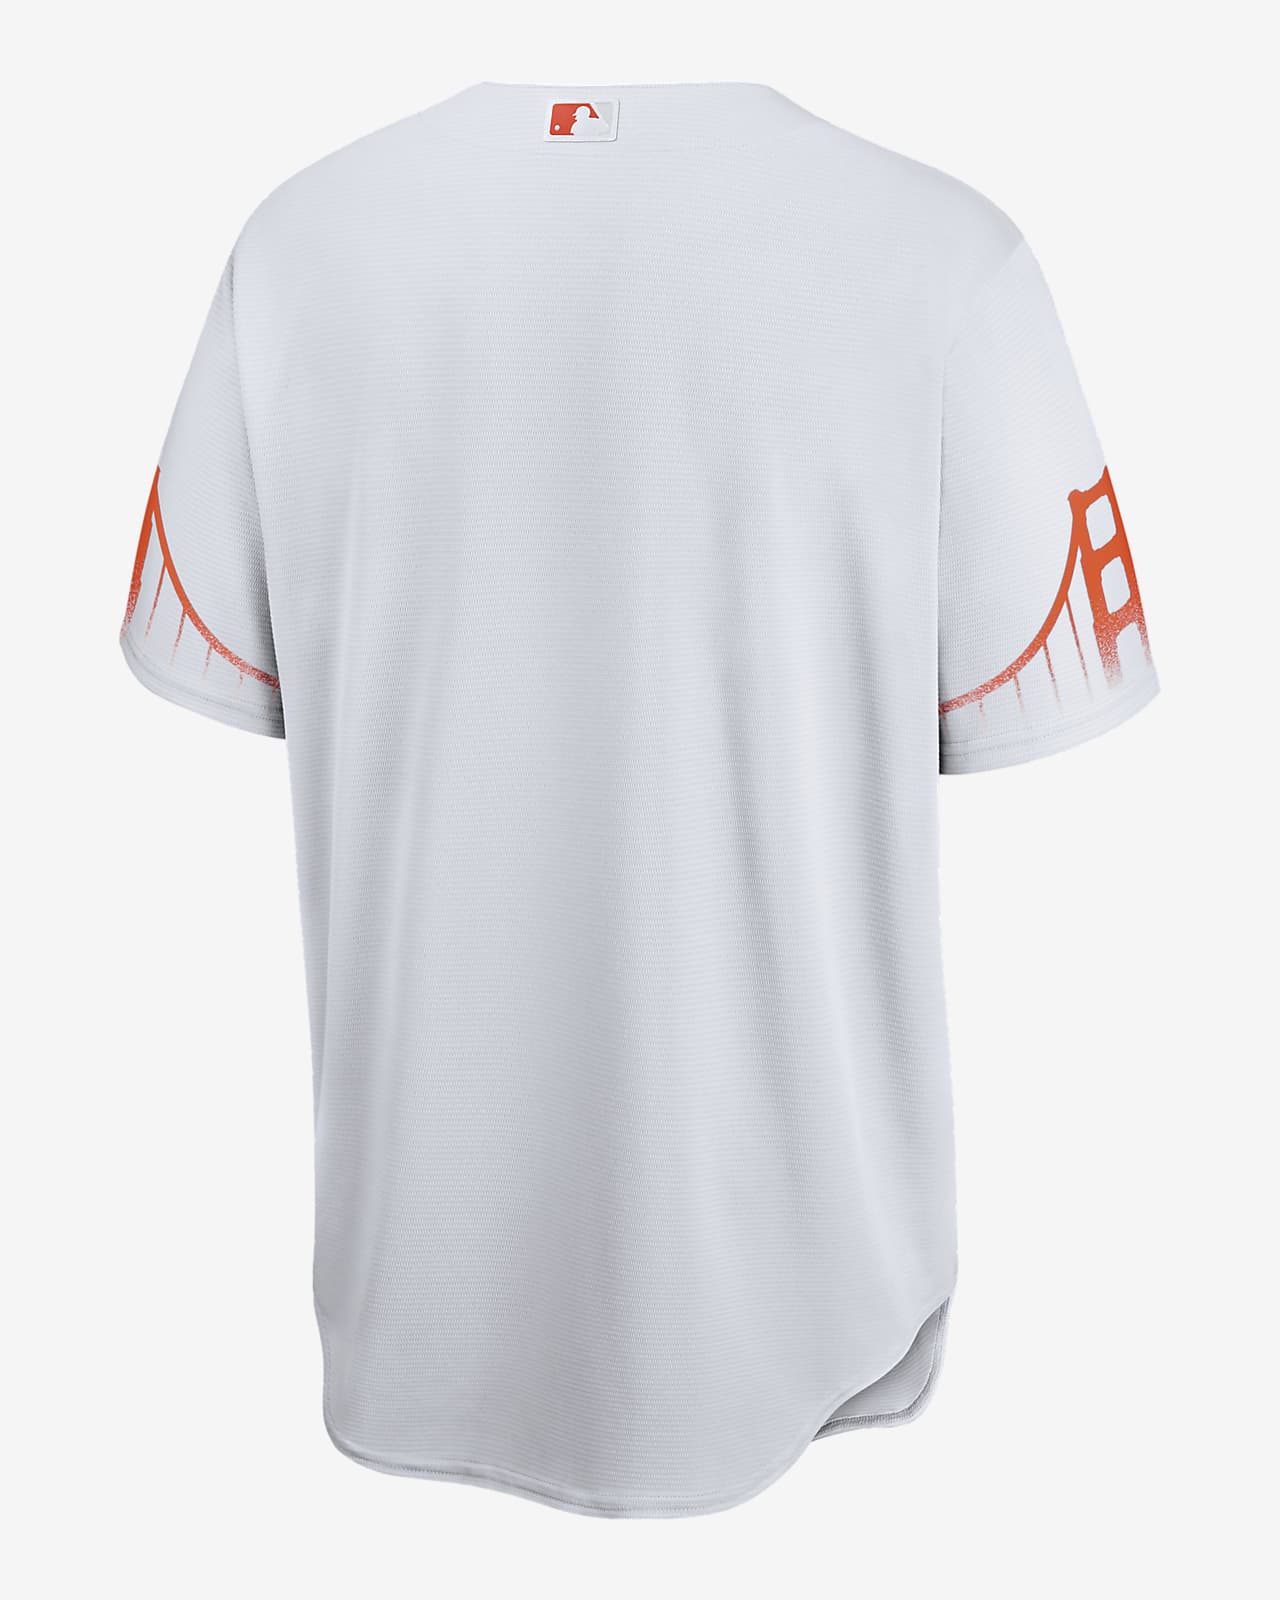 San Francisco Giants Nike City Connect Jersey Factory Sale, SAVE